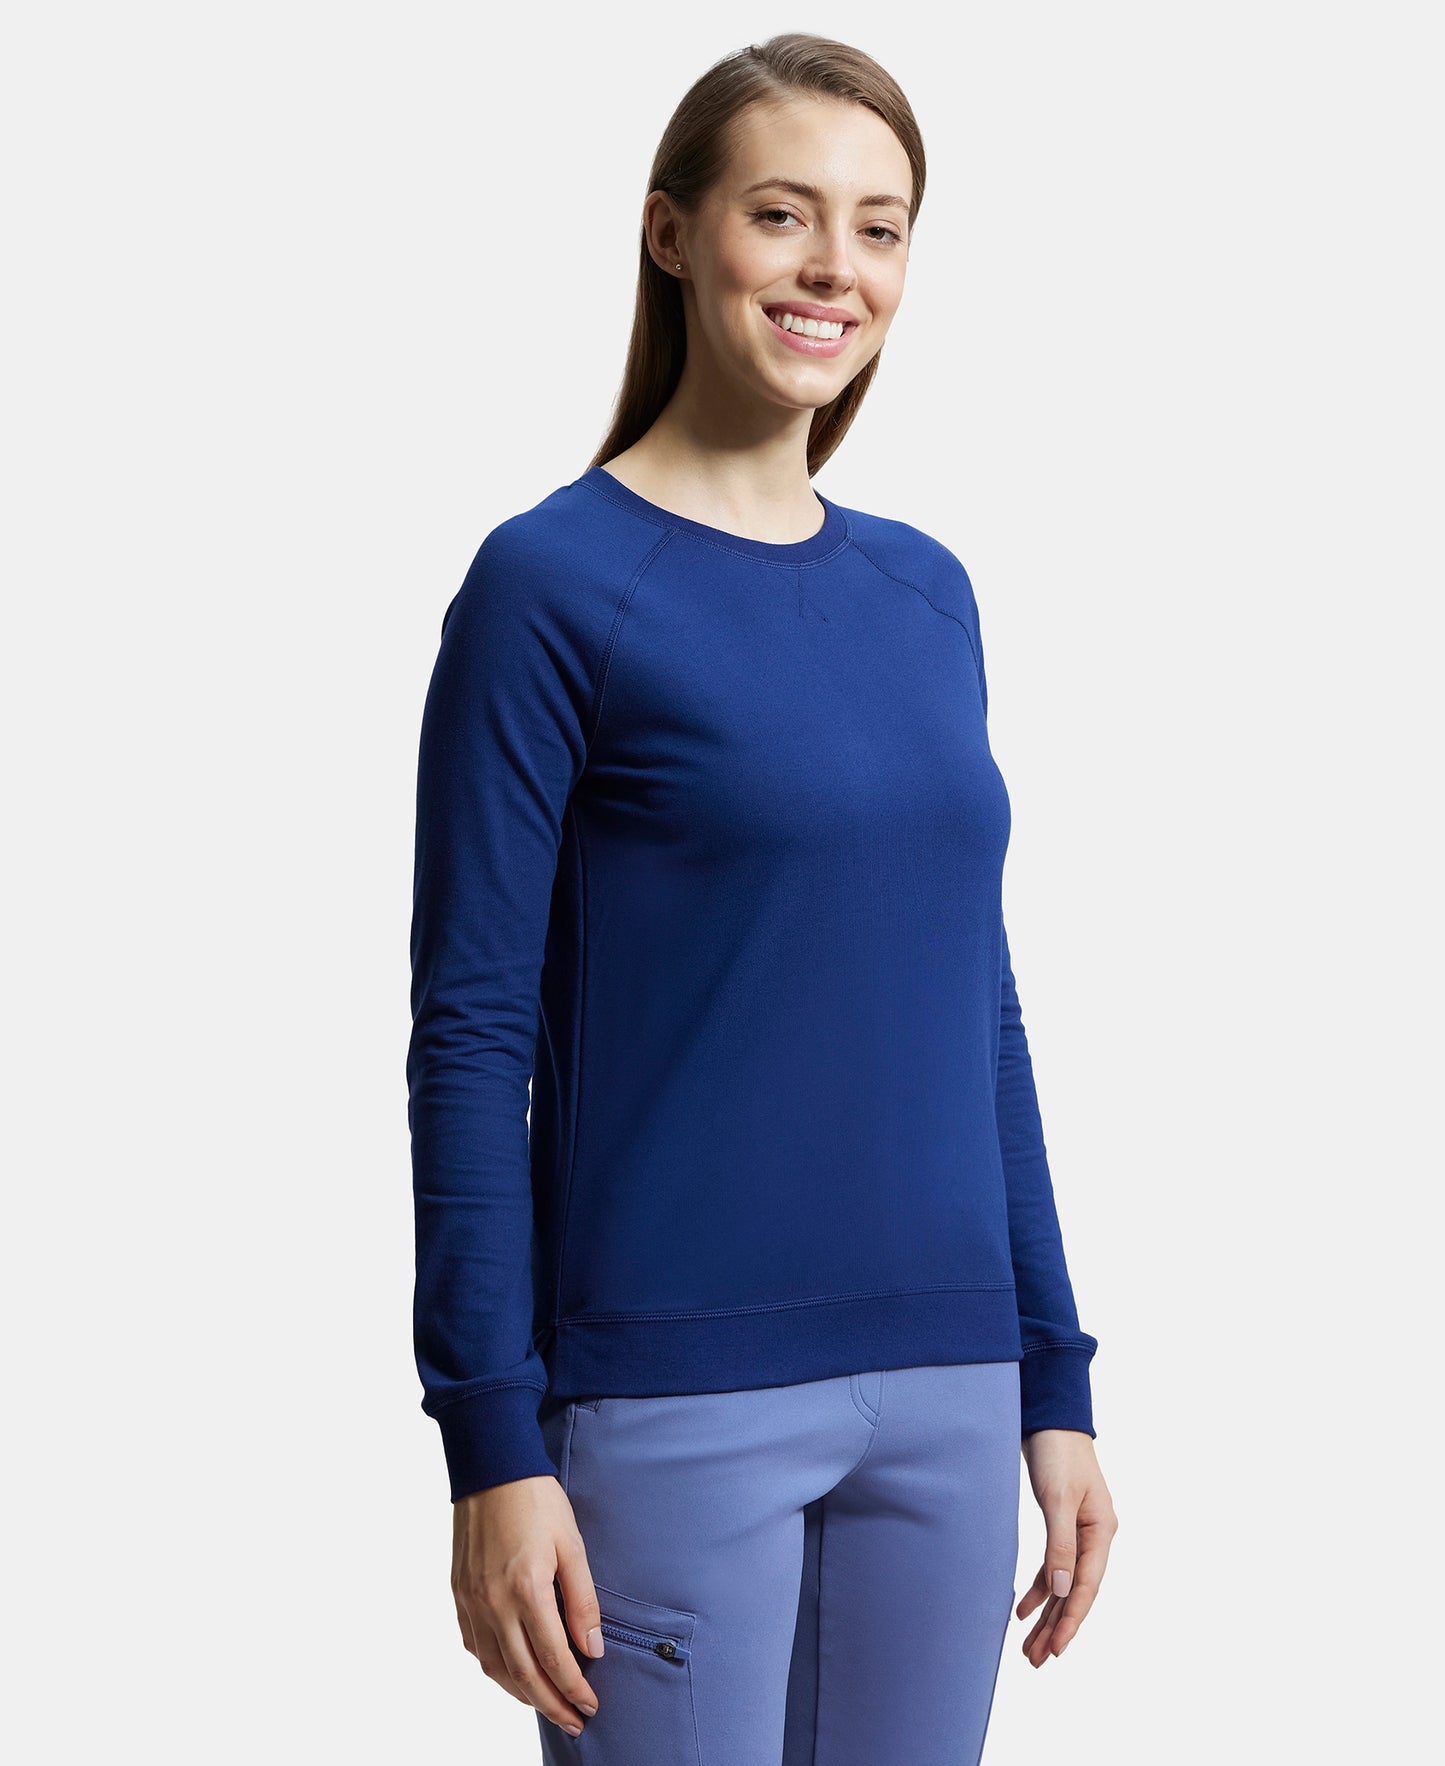 Super Combed Cotton Rich French Terry Fabric Solid Sweatshirt with Raglan Sleeve Styling - Medieval Blue-2